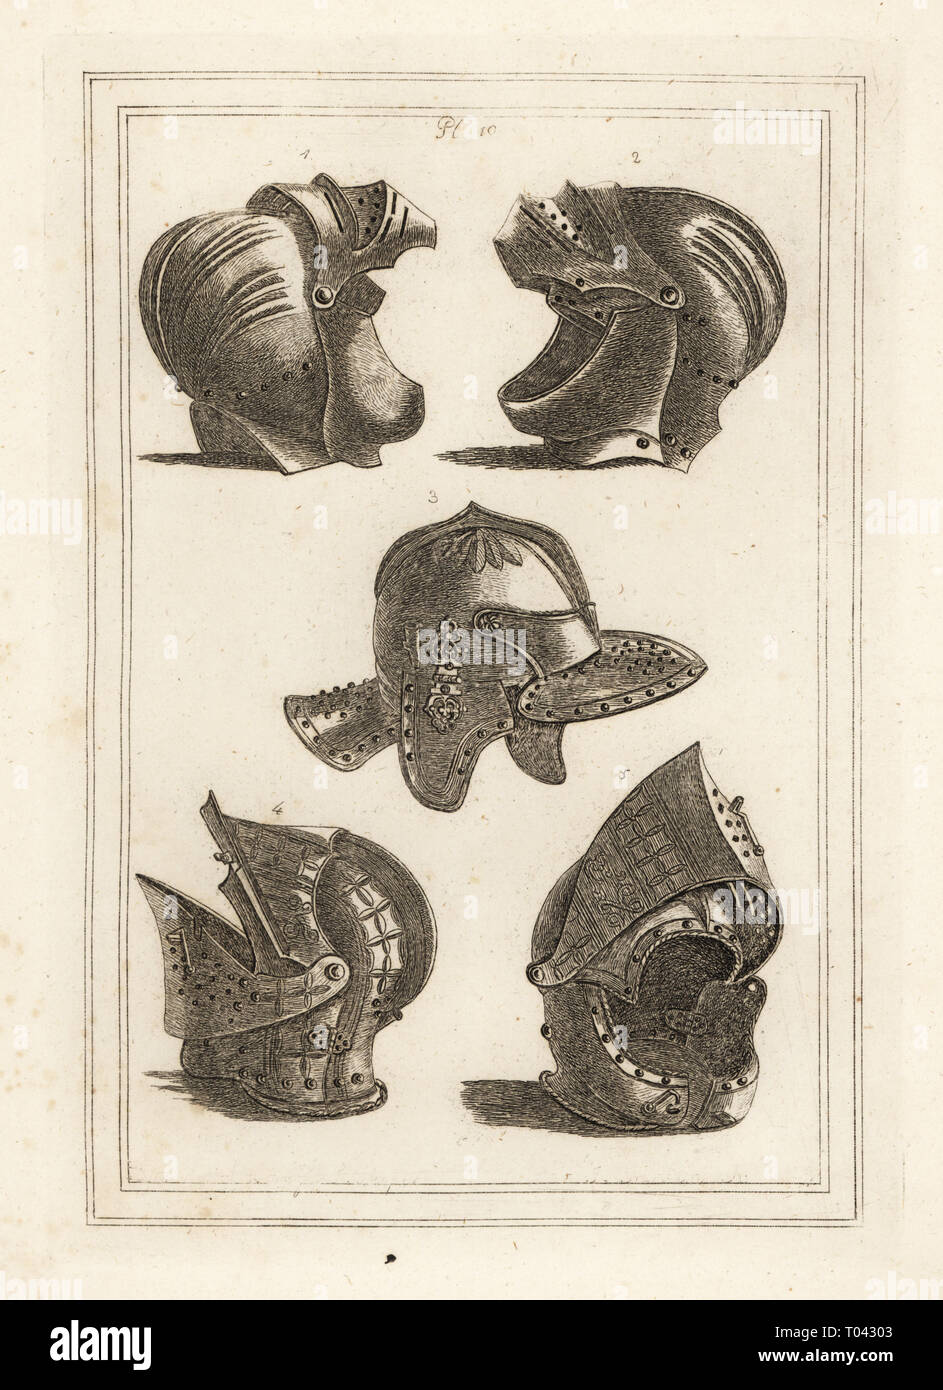 Helmet of John de Courcy, Earl of Ulster 1,2, Oliver Cromwell’s headpiece 3, tilting helmet 4,5. Copperplate engraving from Francis Grose's Military Antiquities respecting a History of the English Army, Stockdale, London, 1812. Stock Photo